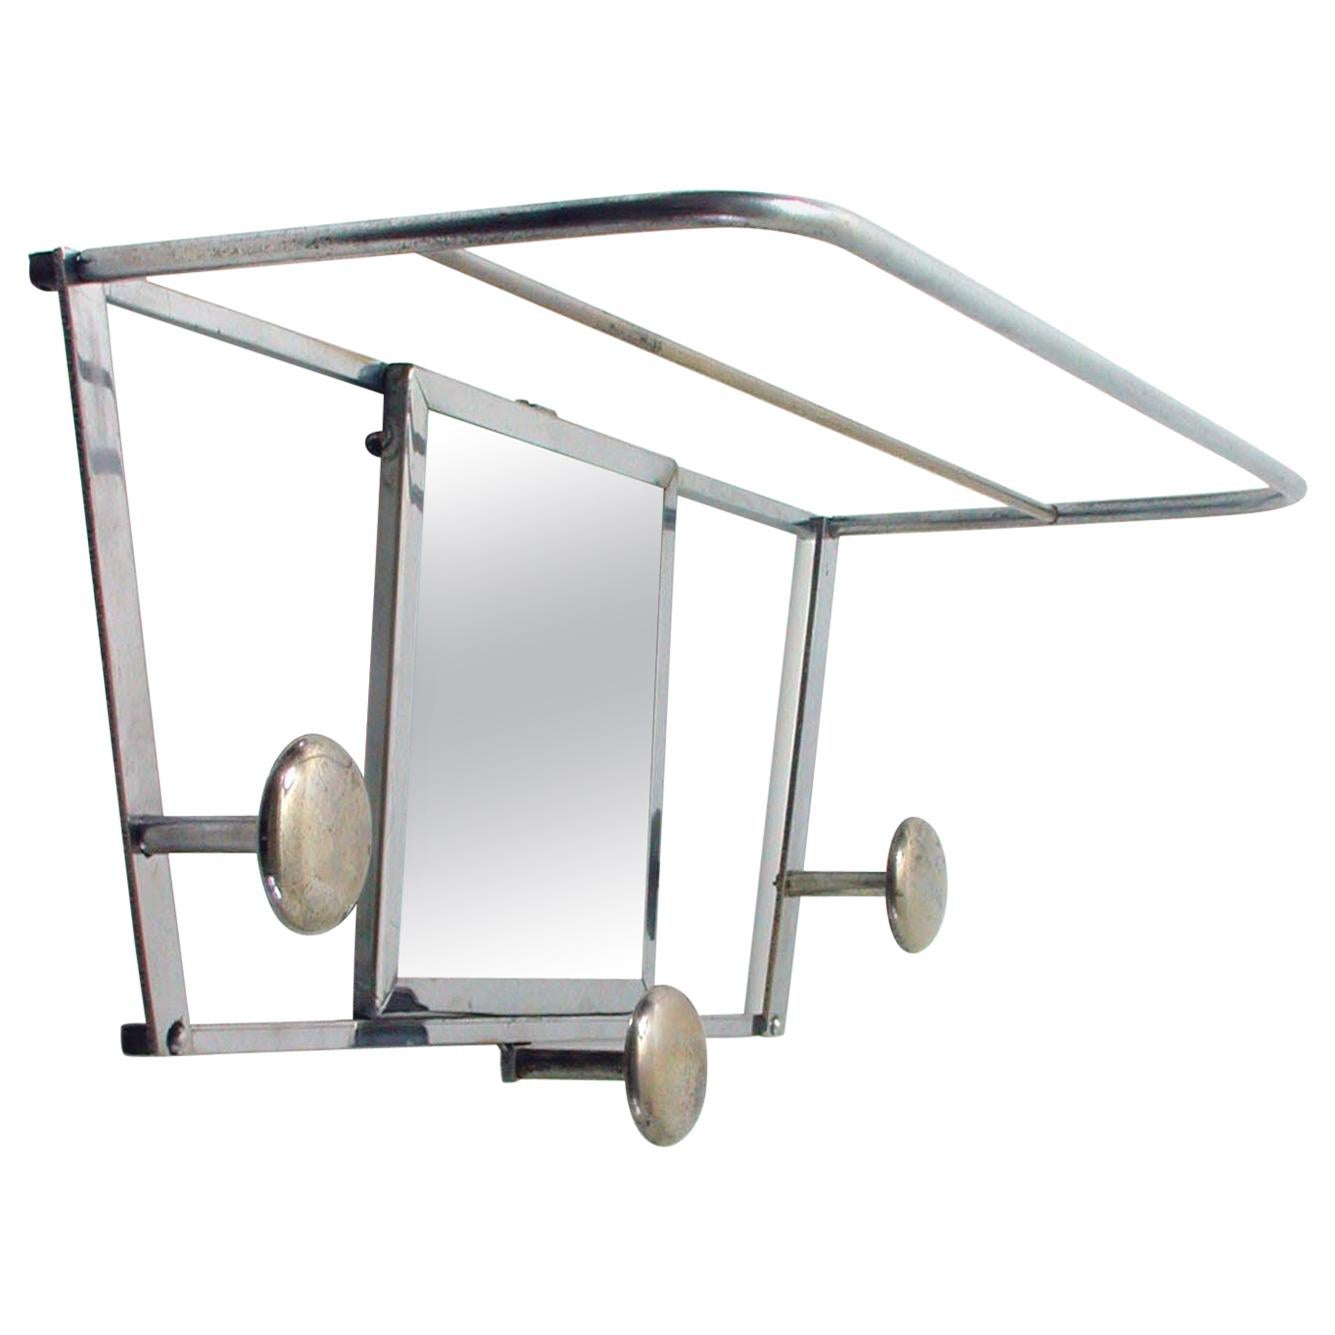 Art Deco French Industrial Chrome Coat and Hat Rack with Mirror, 1930s